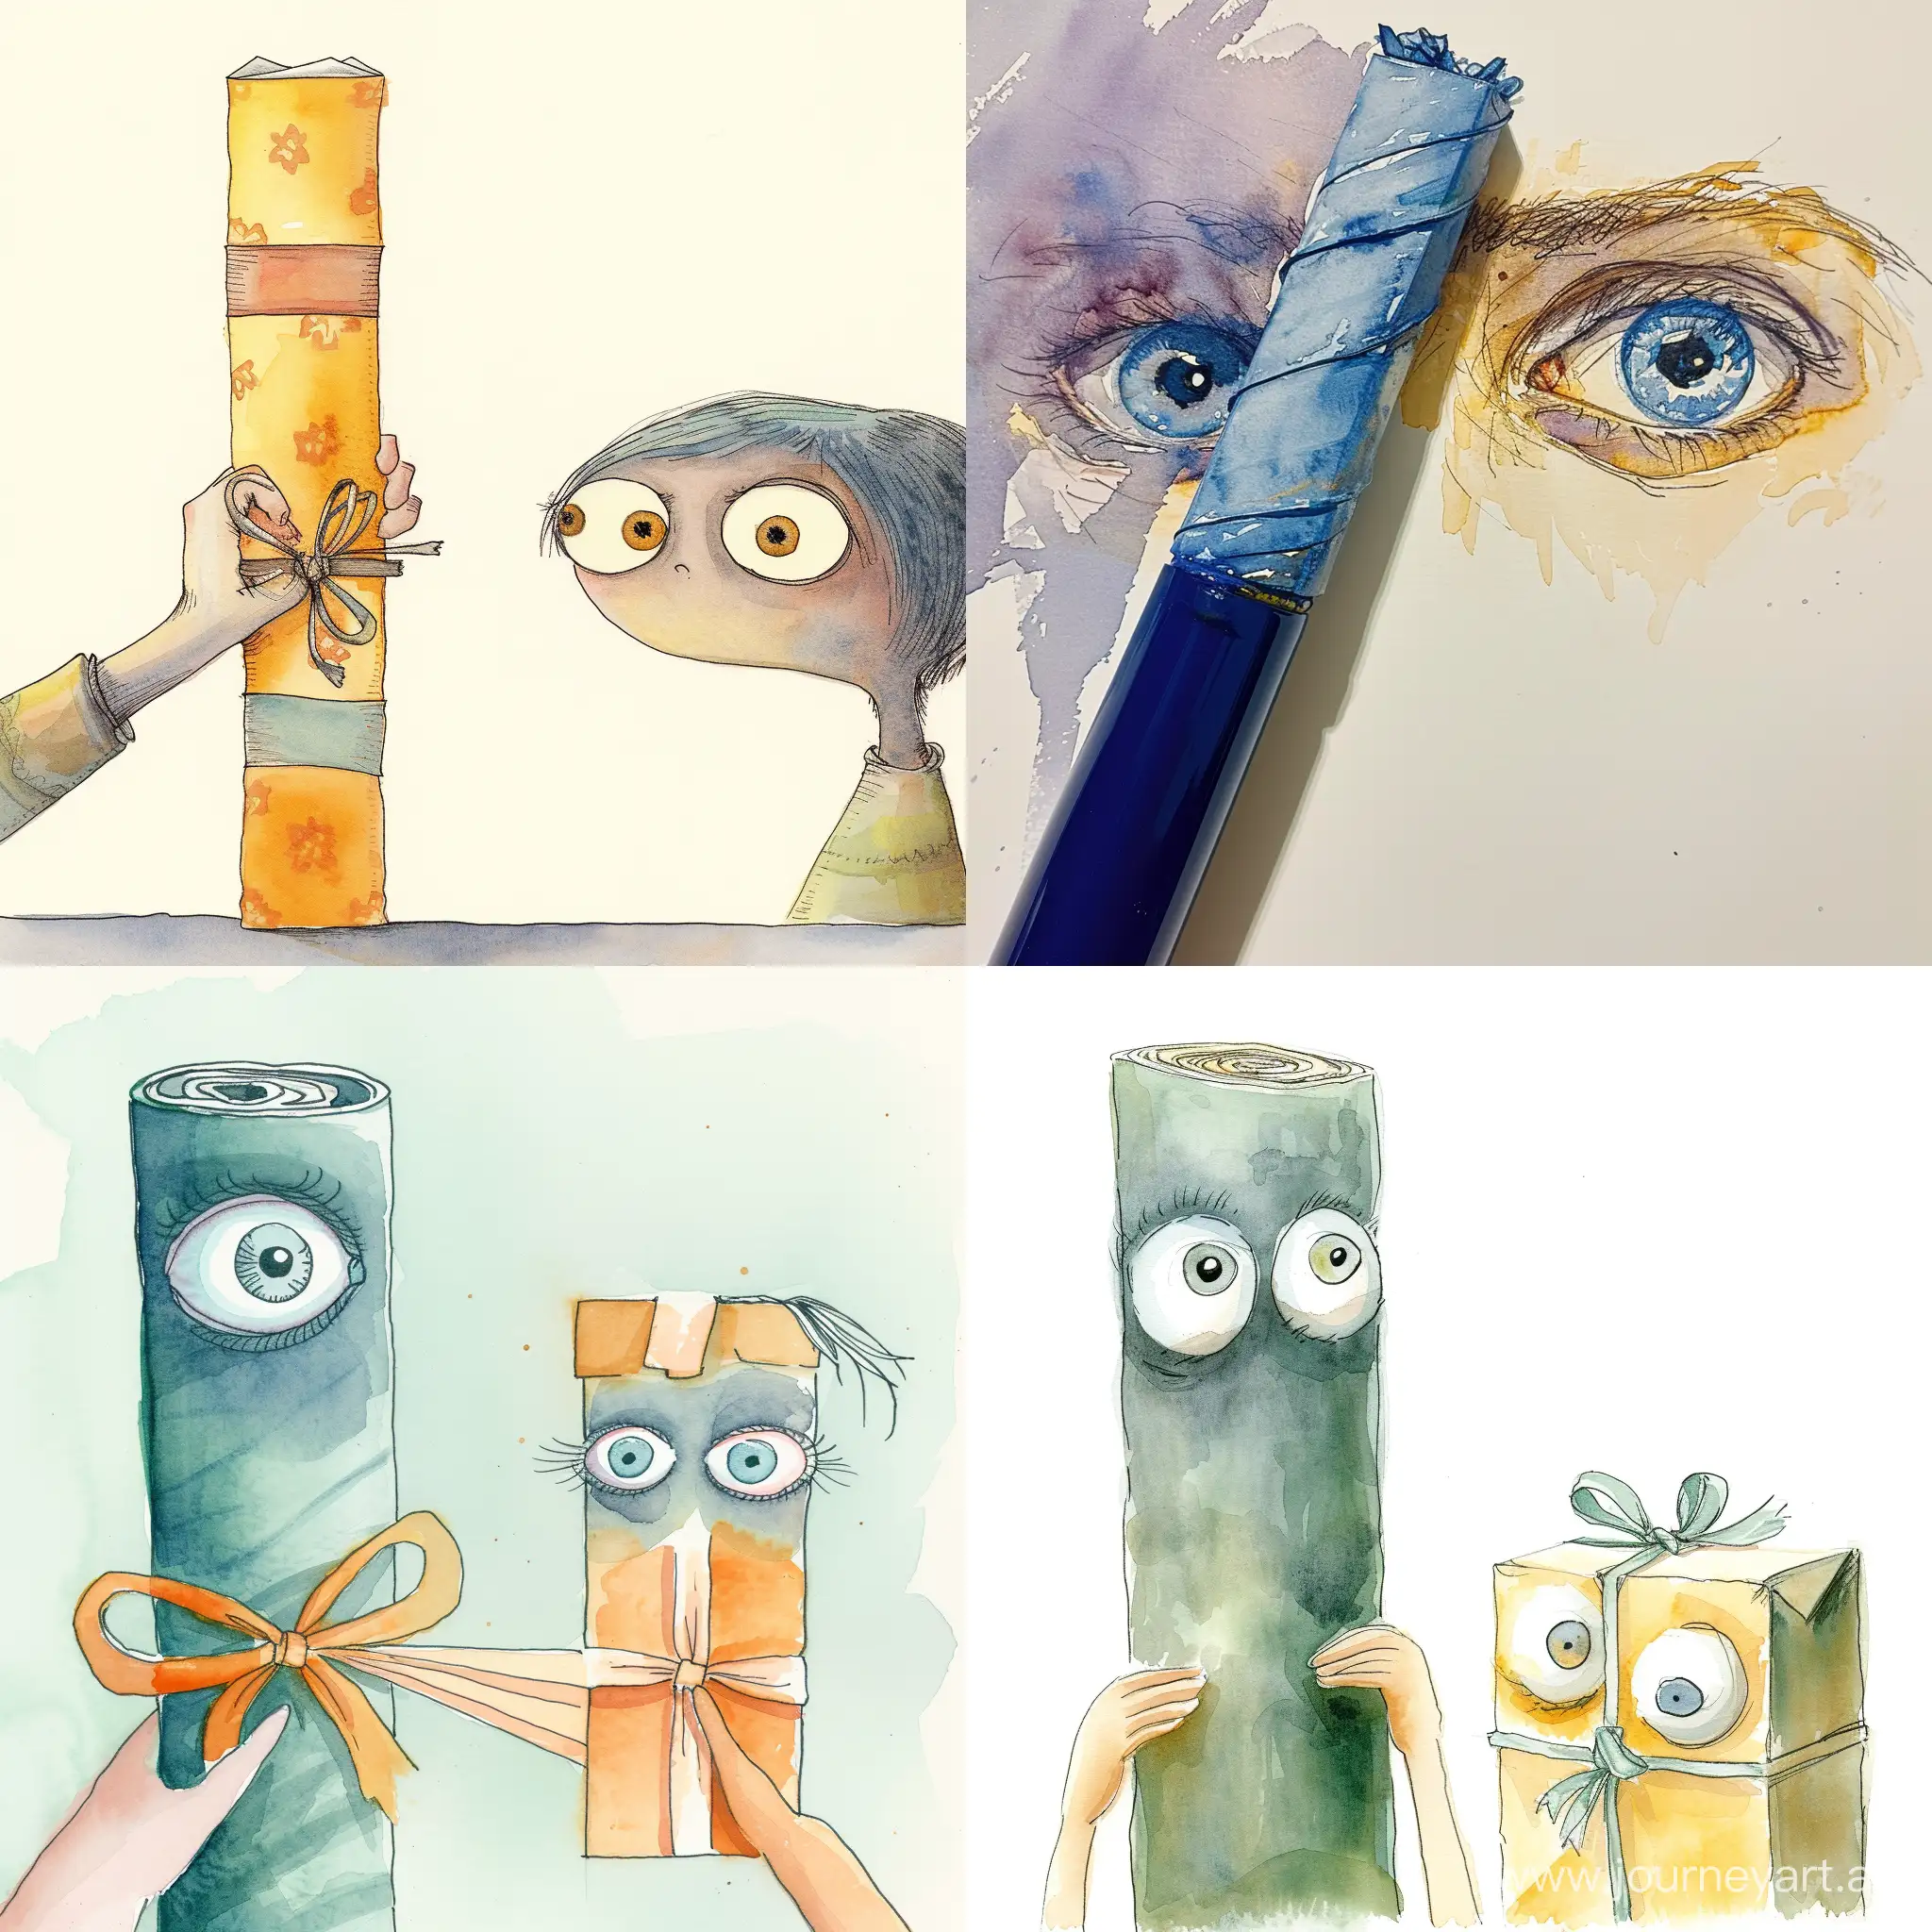 Watercolor tube has eyes looking at someone wrapping a package